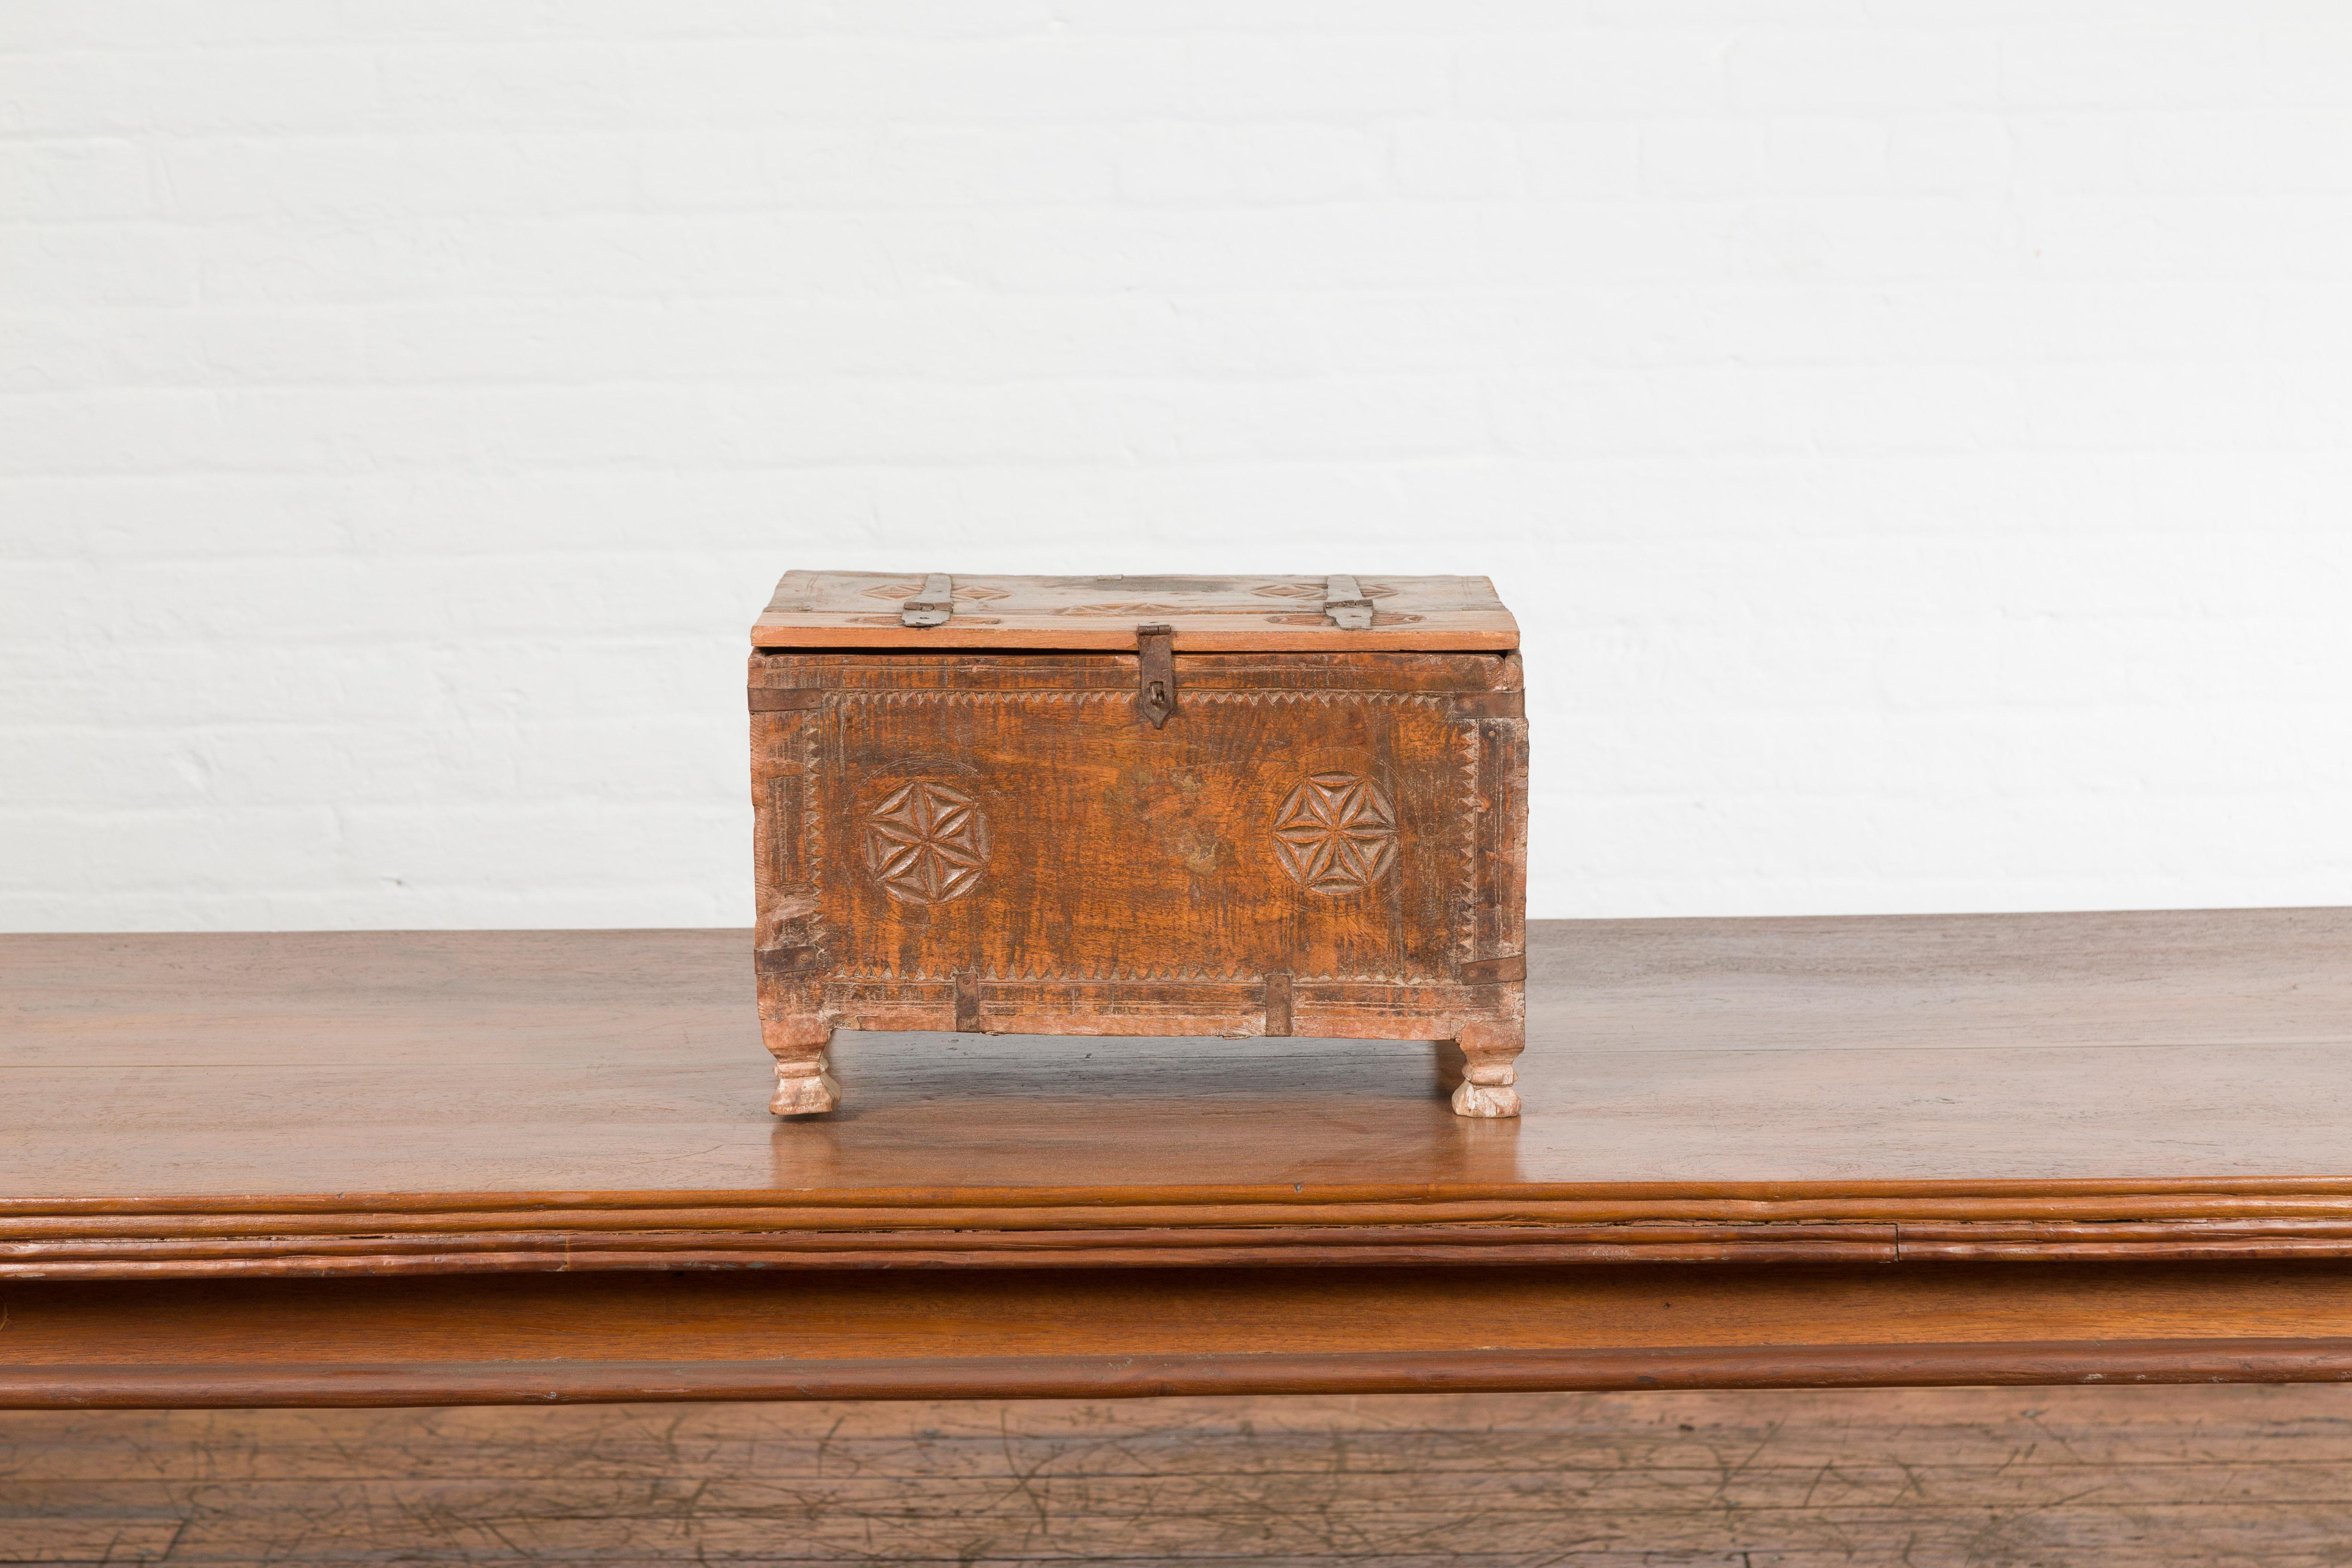 Indian 19th Century Small Wooden Box with Iron Hardware and Carved Rosacea In Good Condition For Sale In Yonkers, NY